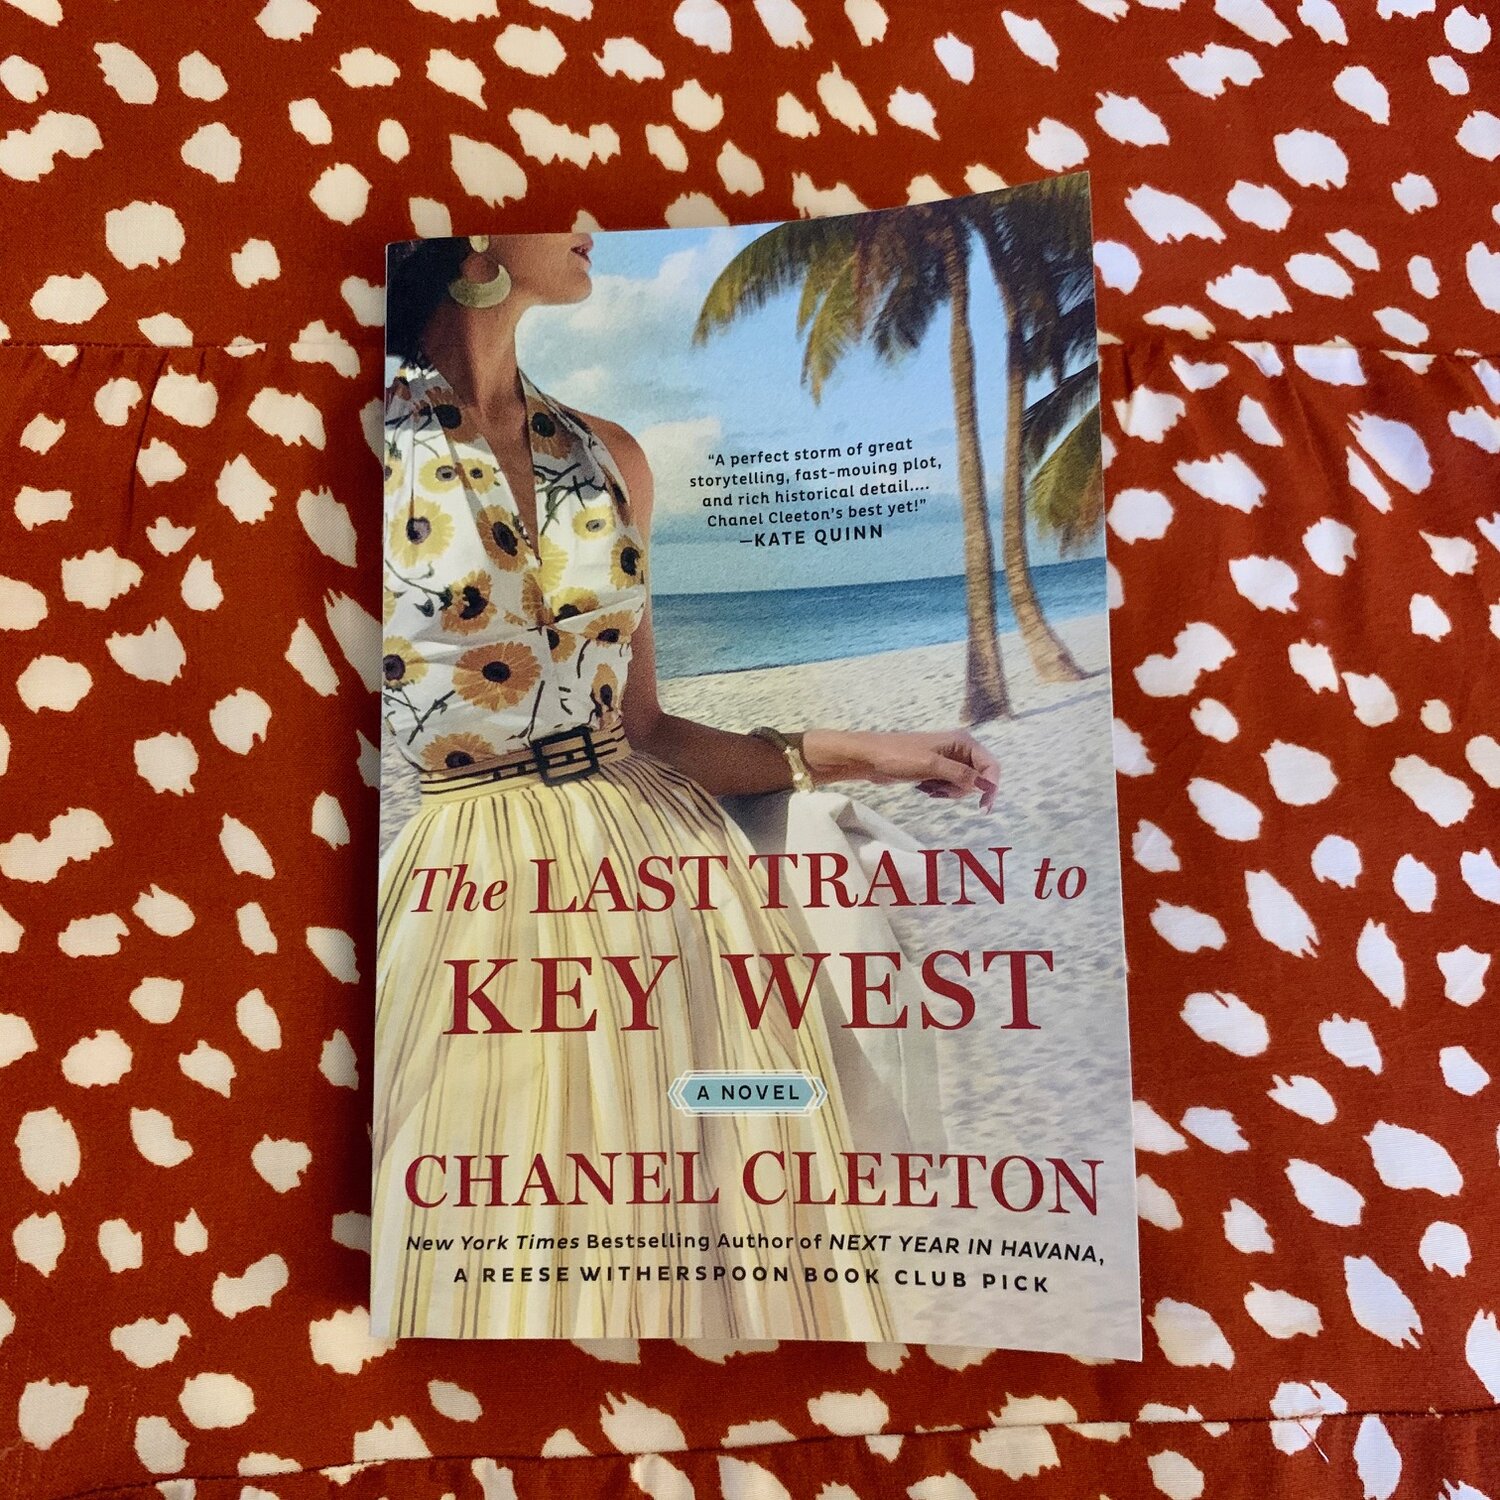 9/100 The last train to Key West by Chanel Cleeton : r/52book